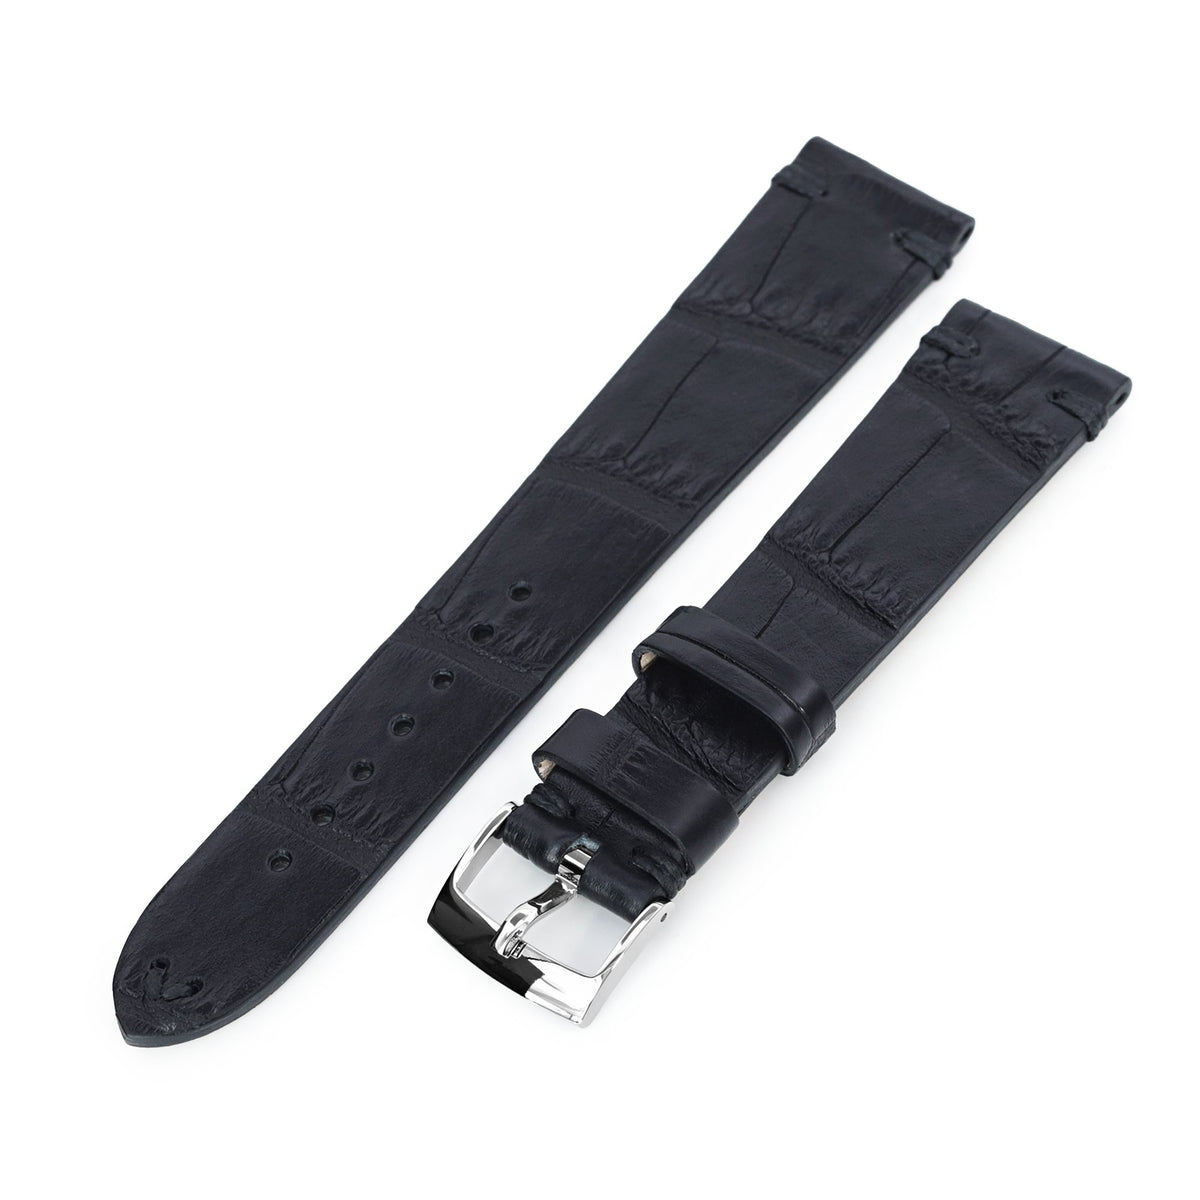 20mm Black Italian Handmade Alligator Belly Watch Band, Same Color Stitching, Polished Buckle Strapcode Watch Bands